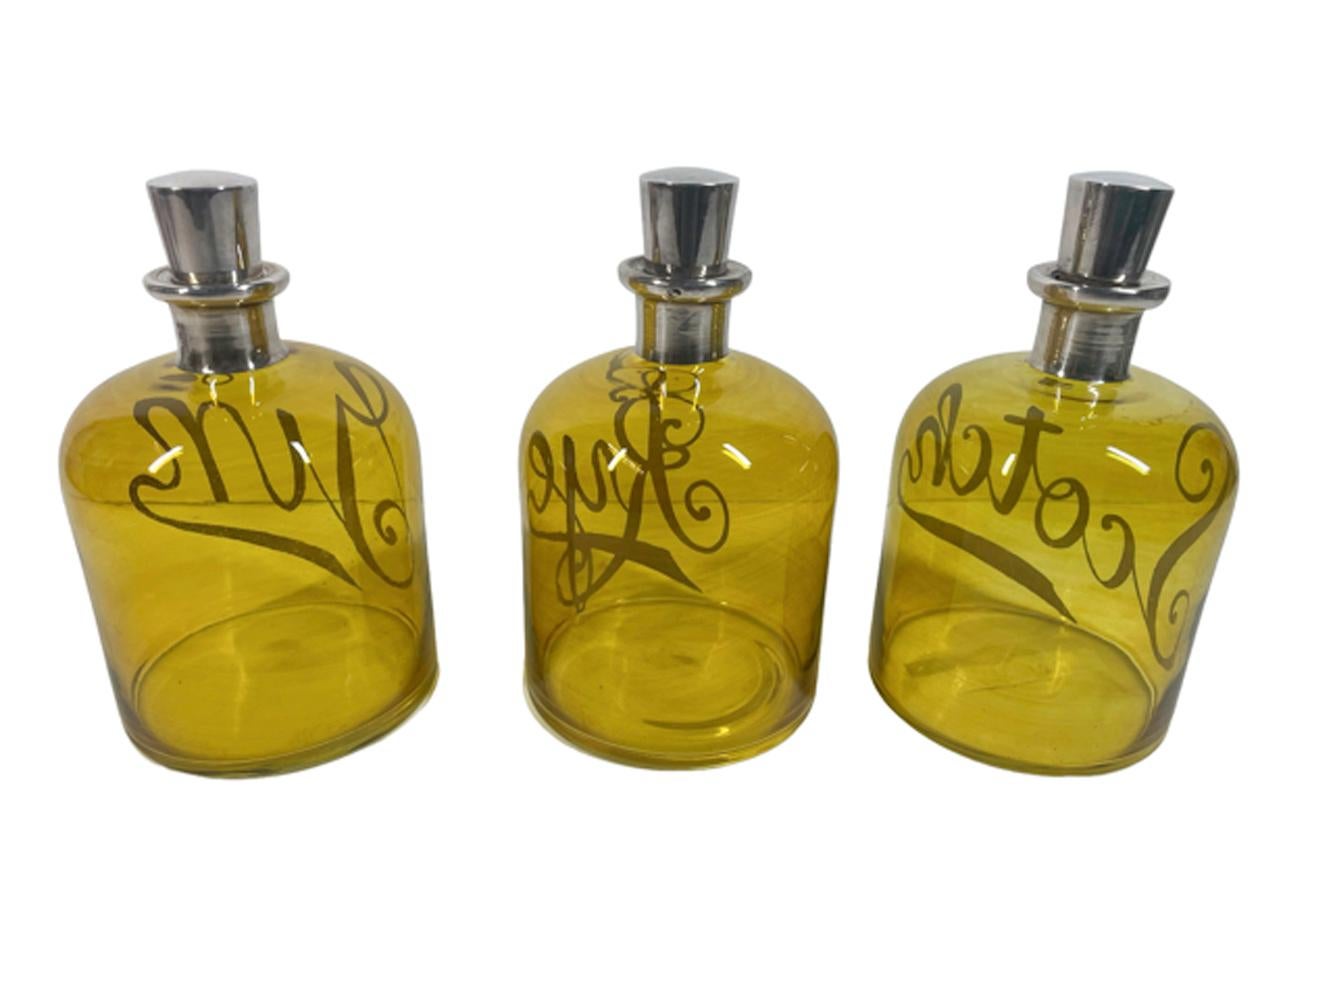 Unusual set of three yellow/amber glass decanters or bar bottles with silver overlay labels 